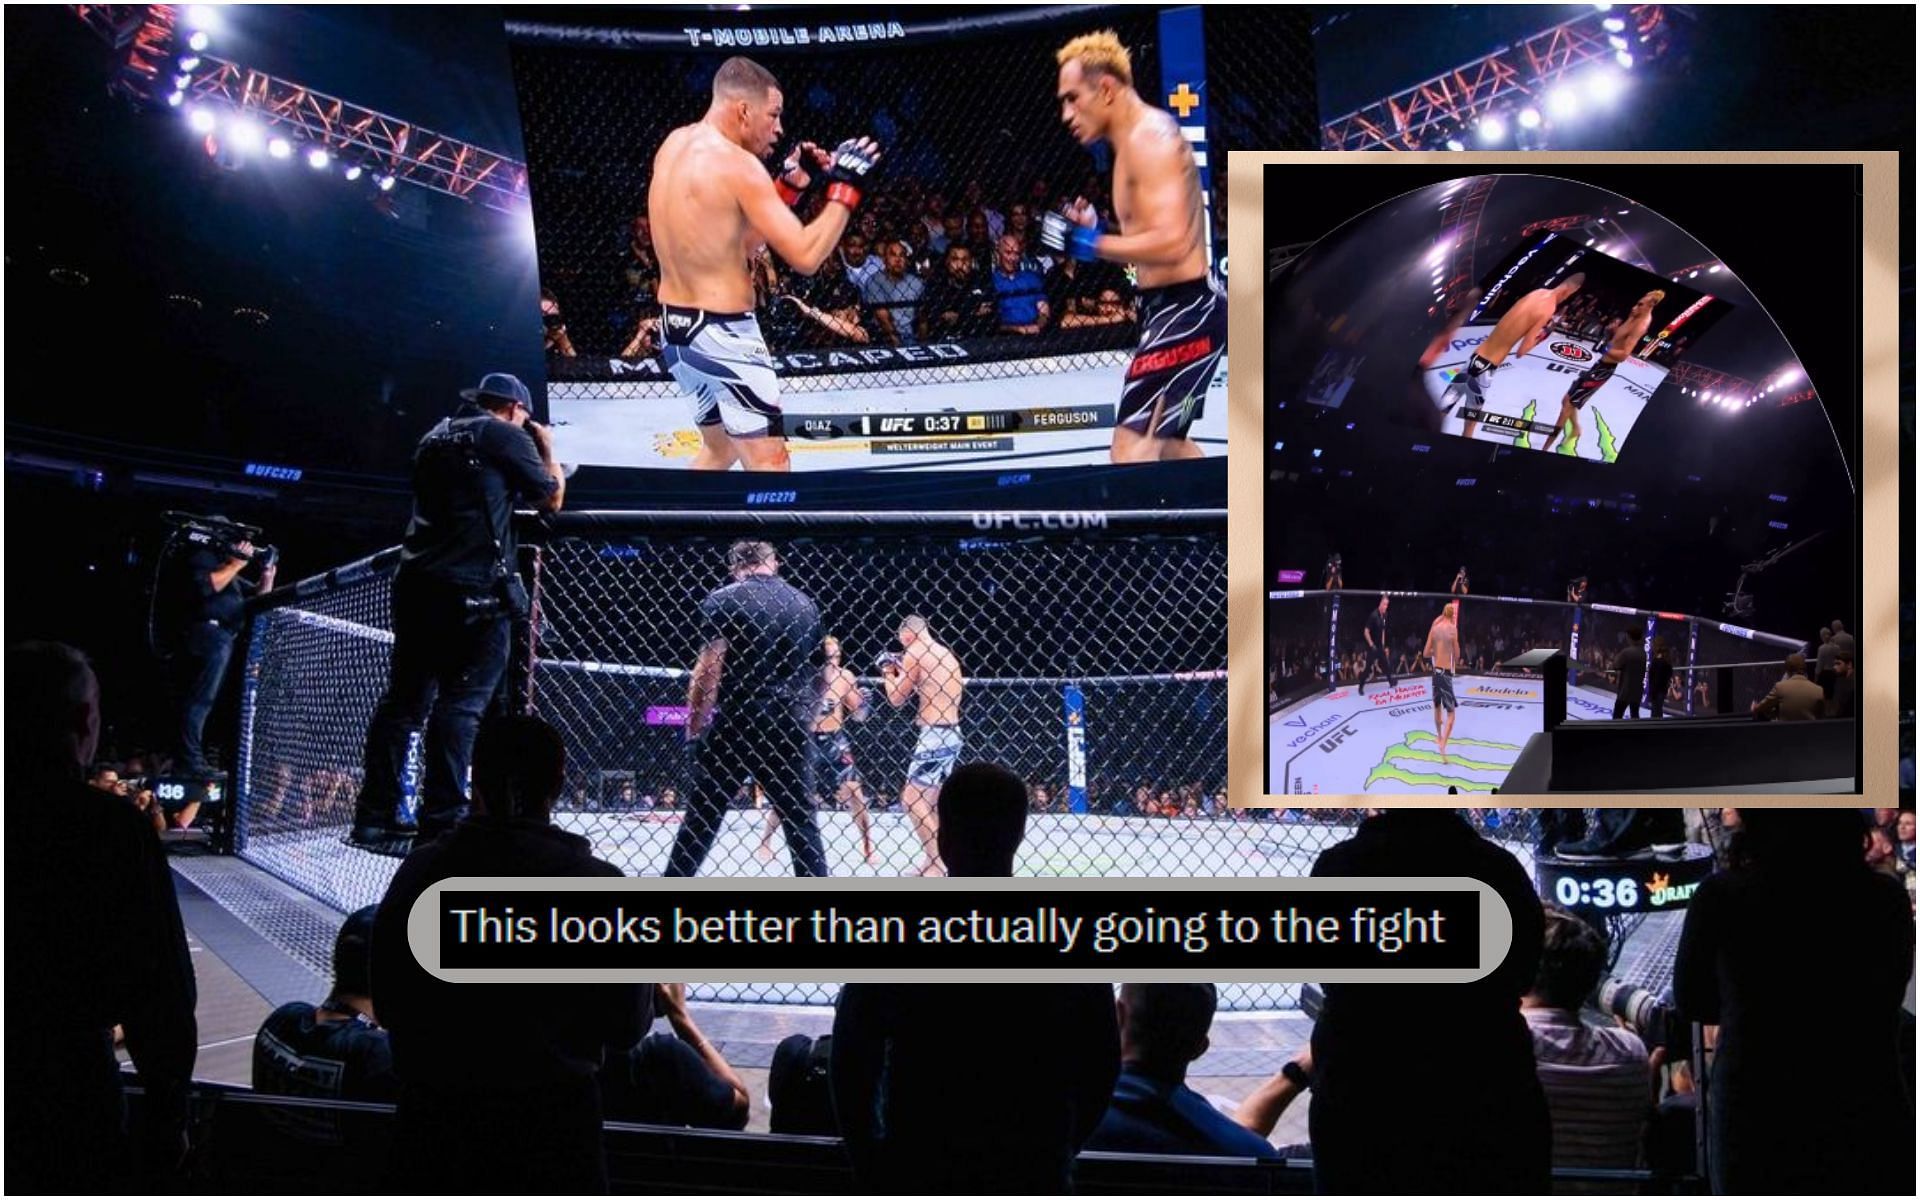 “This is how judges should watch fights” – UFC fights in 8k at the Cosm Experience Center in Salt Lake City has fans awestruck